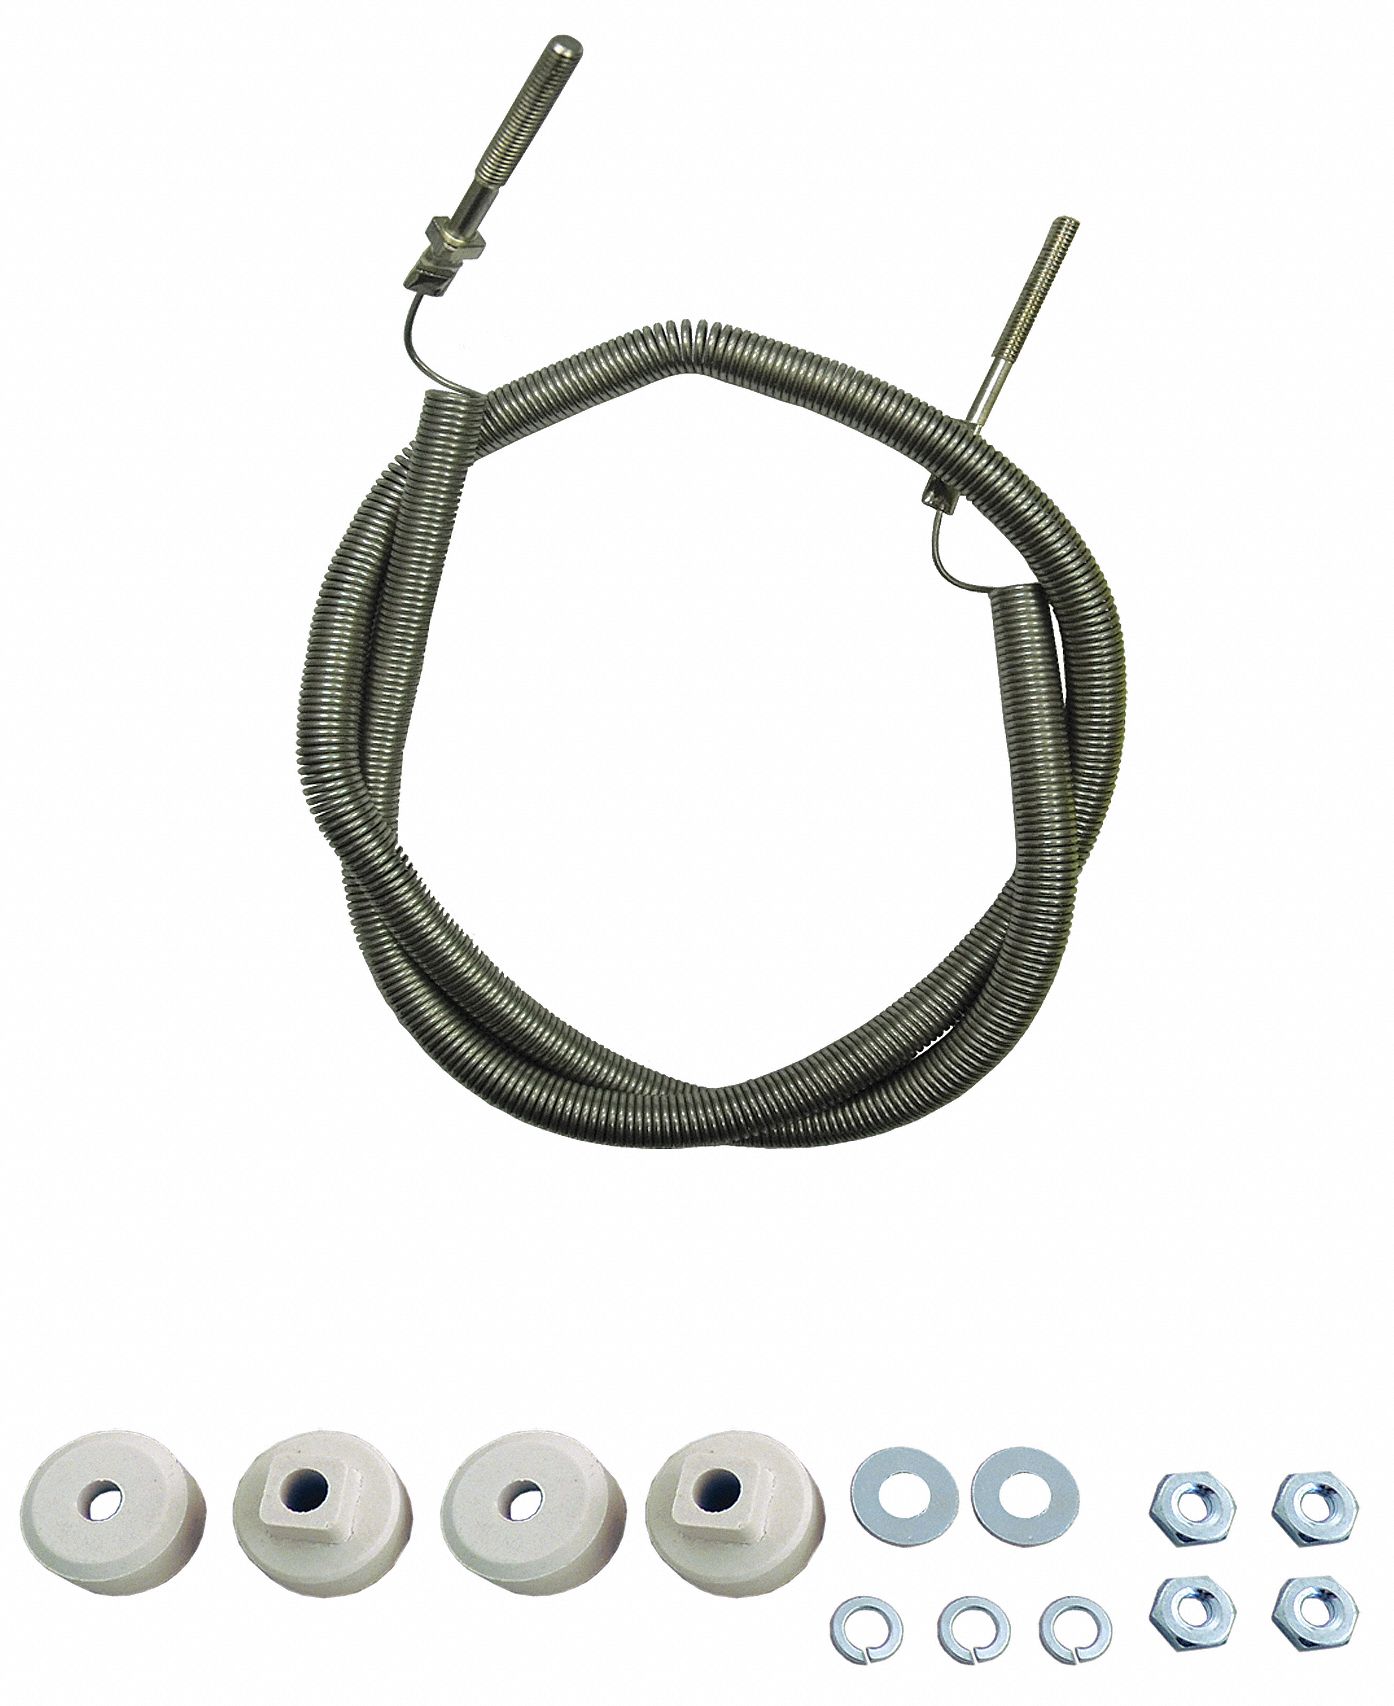 Ejendommelige præmie Drivkraft SUPCO, 18 in Coil Lg, 3/8 in Outside Dia., Electric Heater Coil Re-String  Kit - 32MY05|DH502-4 - Grainger